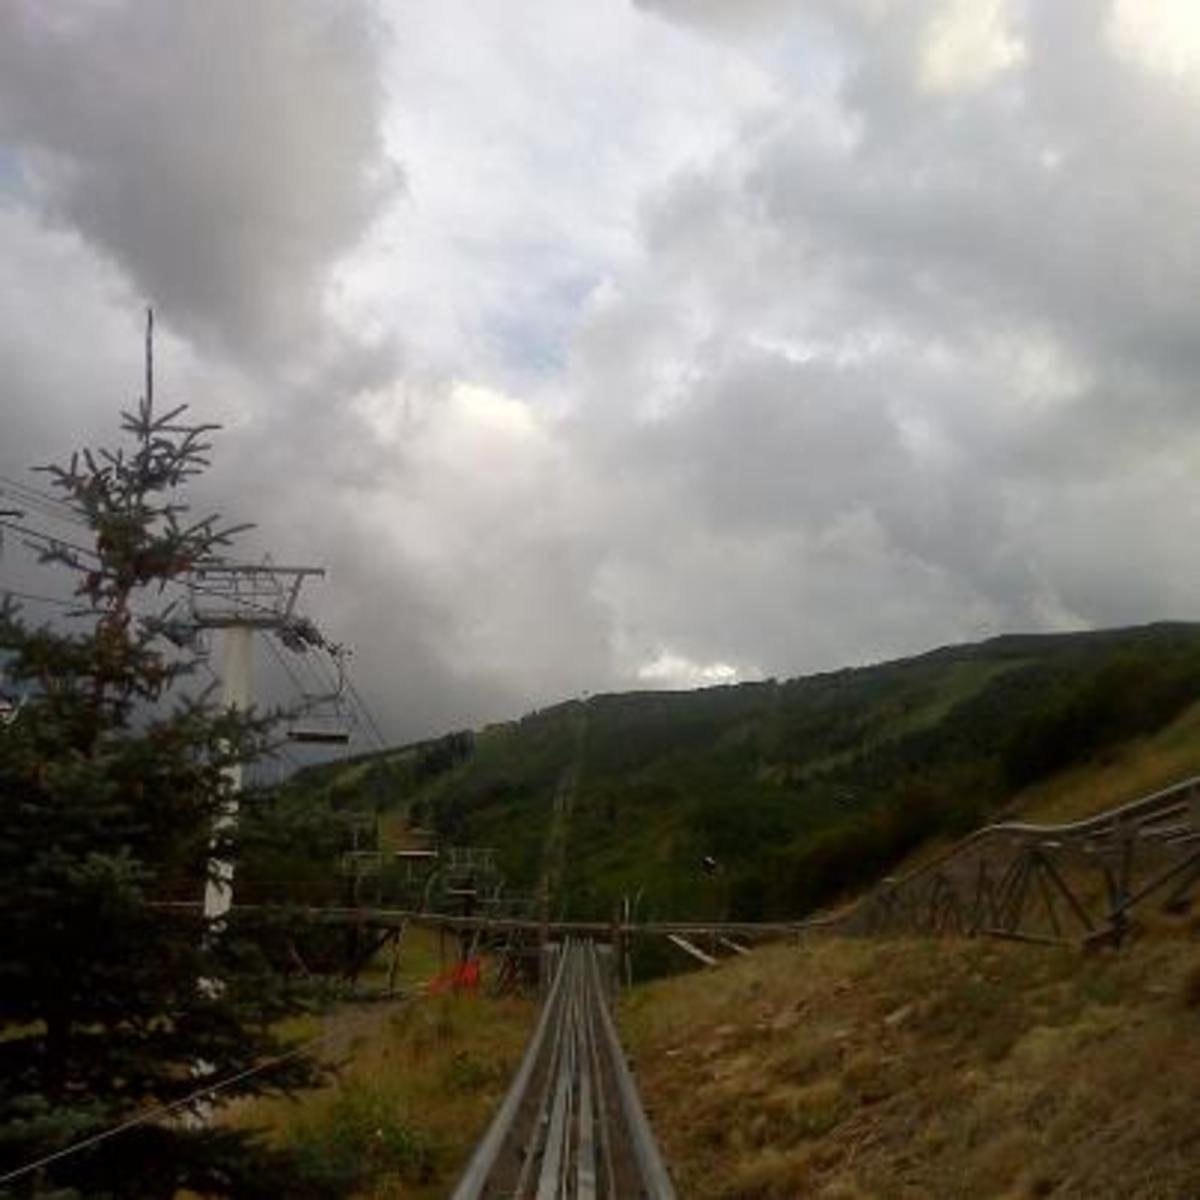 View on the way up the Alpine Coaster